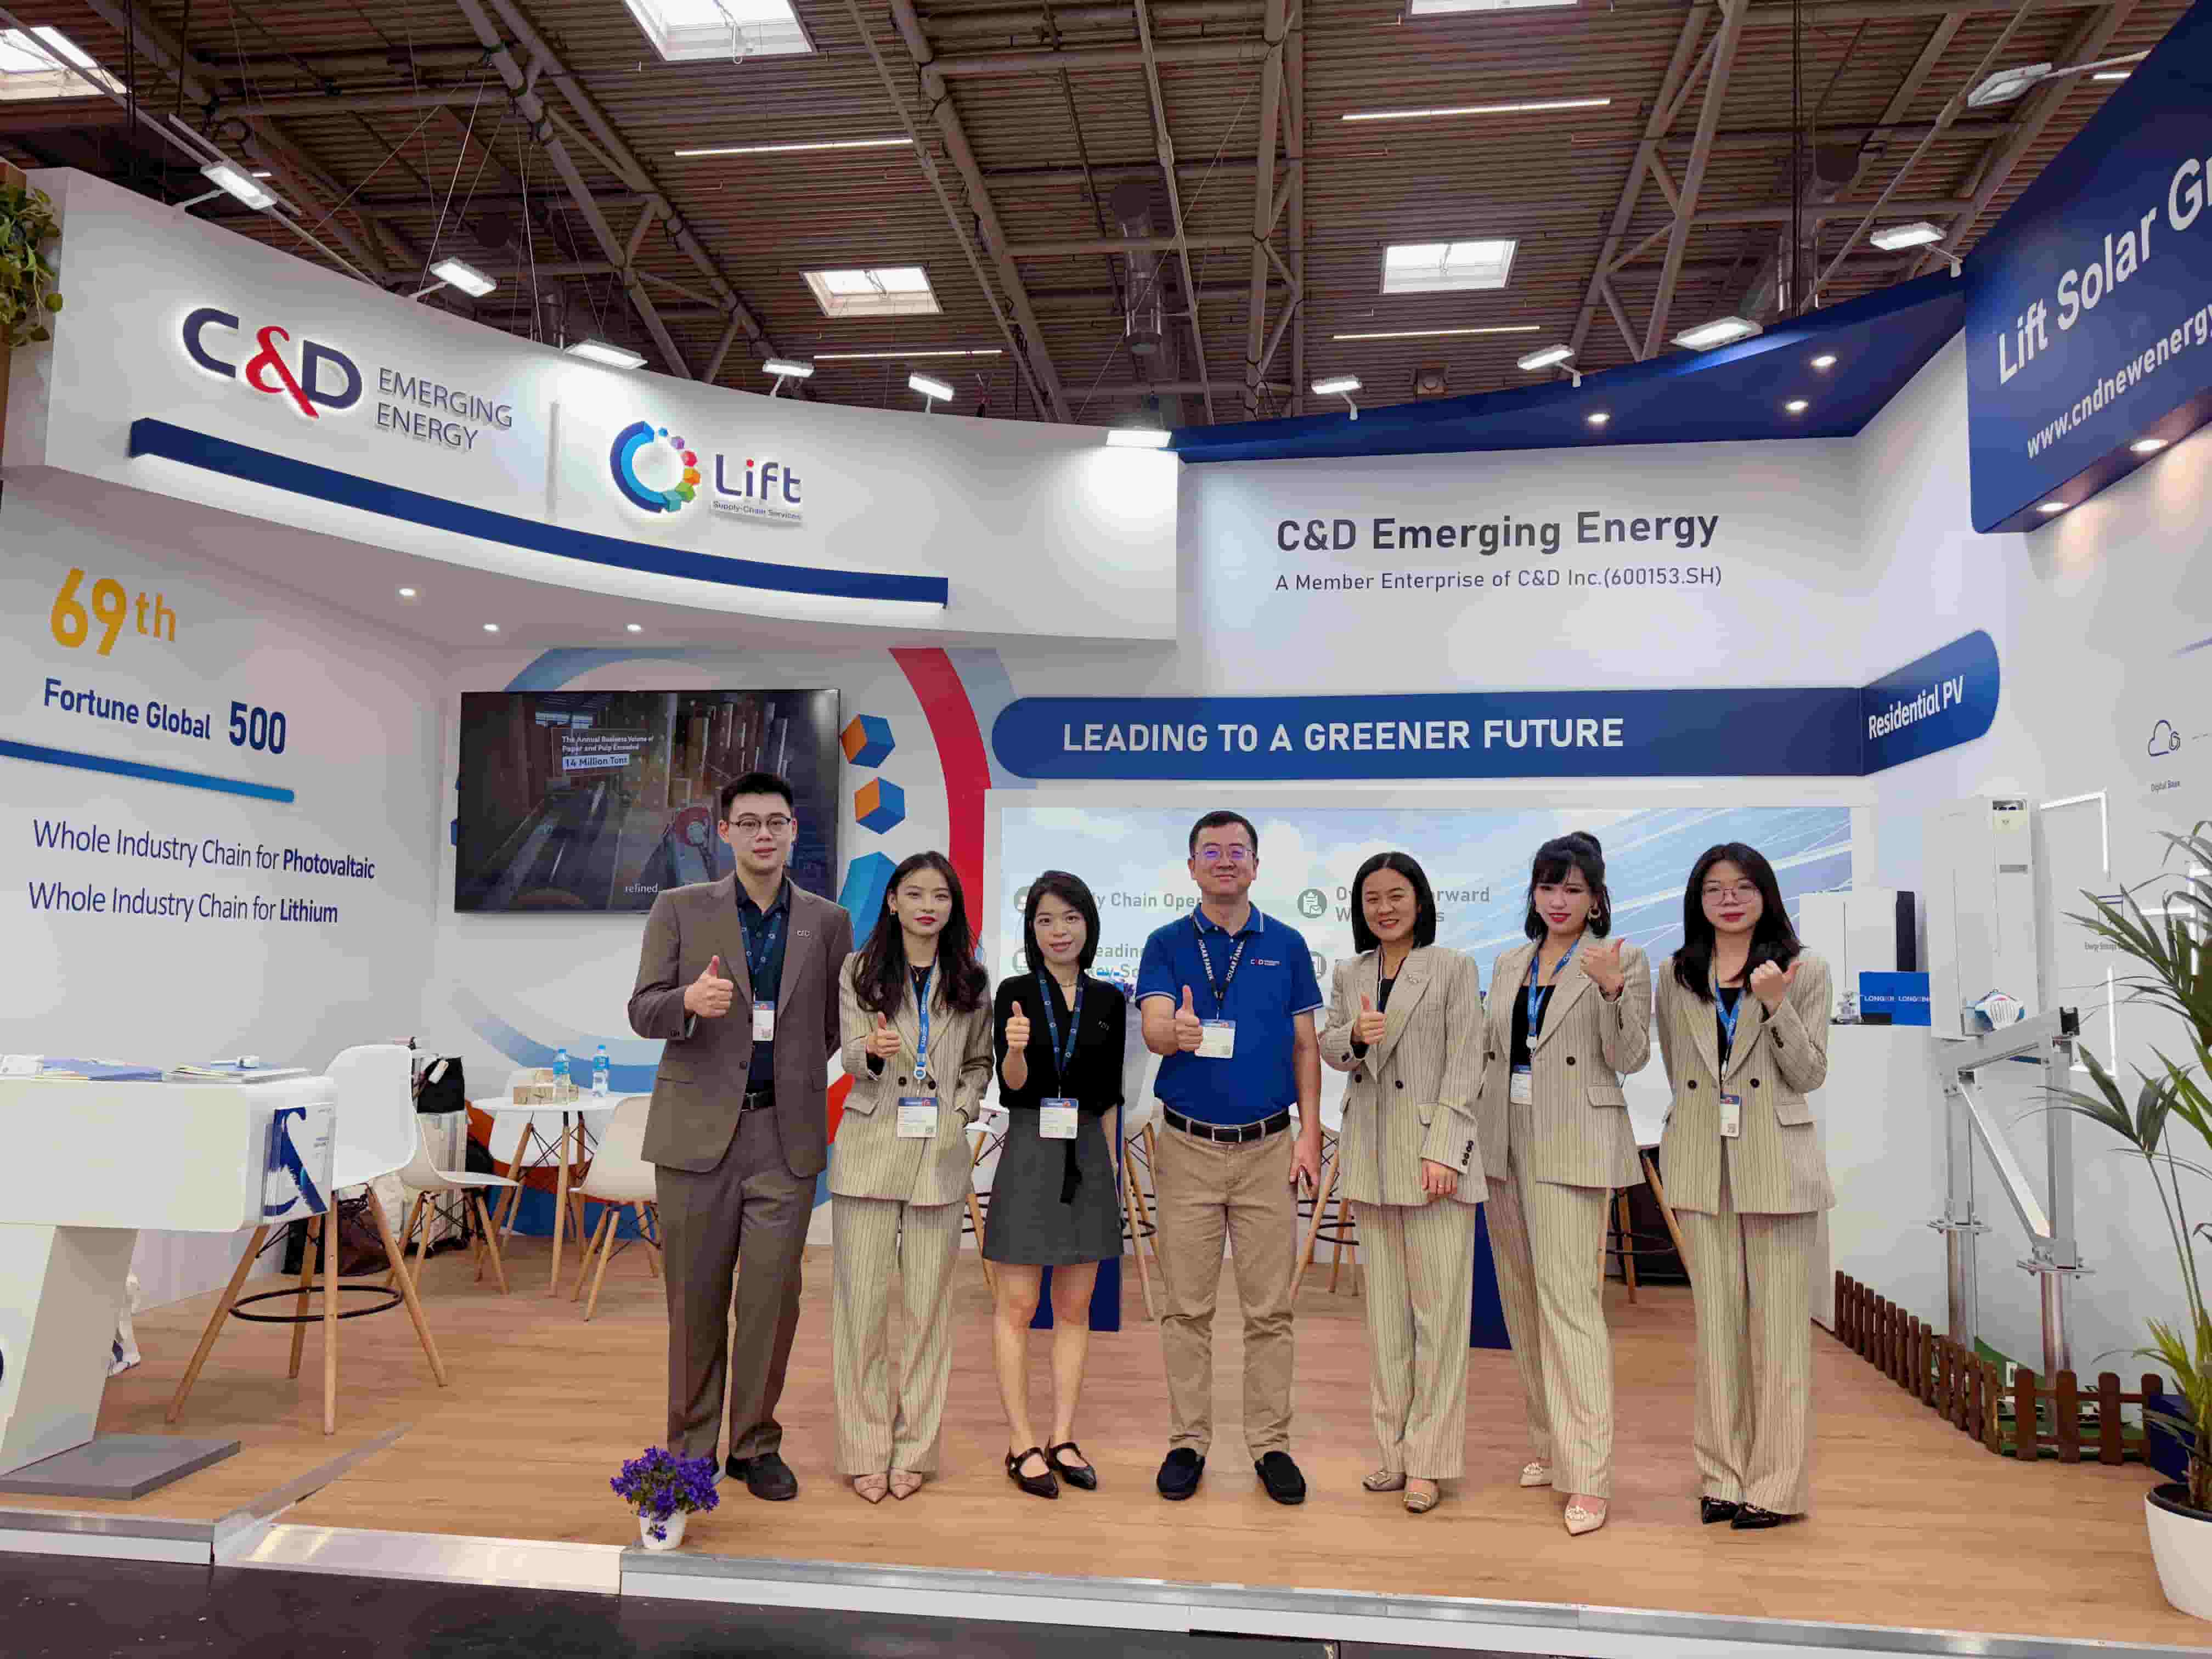 Exciting news! Xiamen C&D Emerging Energy Shines at Intersolar Europe, Charting a Blueprint for a "Zero-Carbon" Future